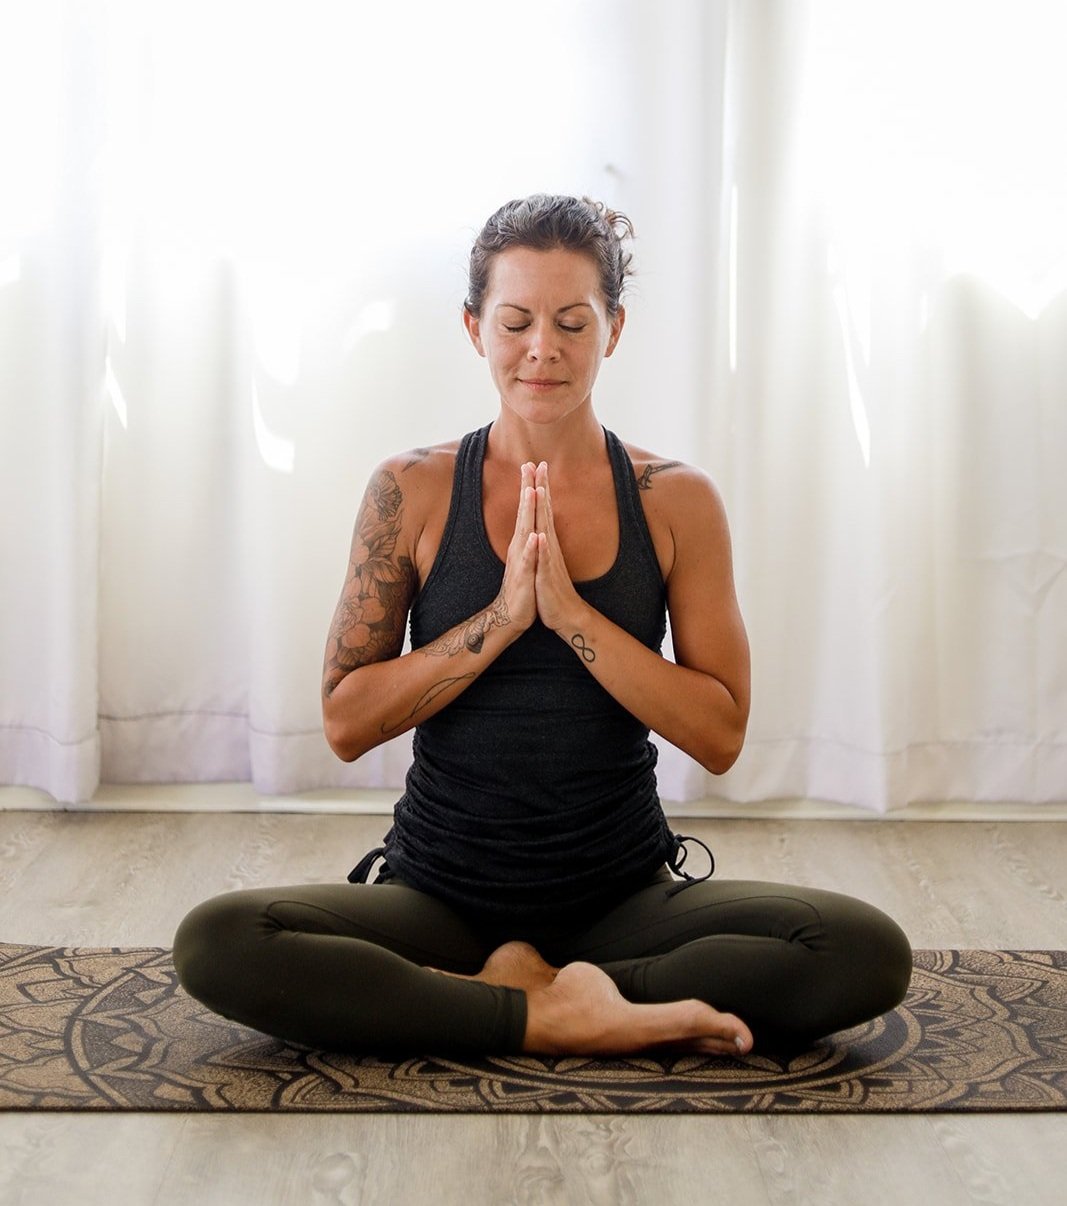 Yoga Therapist Jobs and Career Opportunities - Breathing Deeply